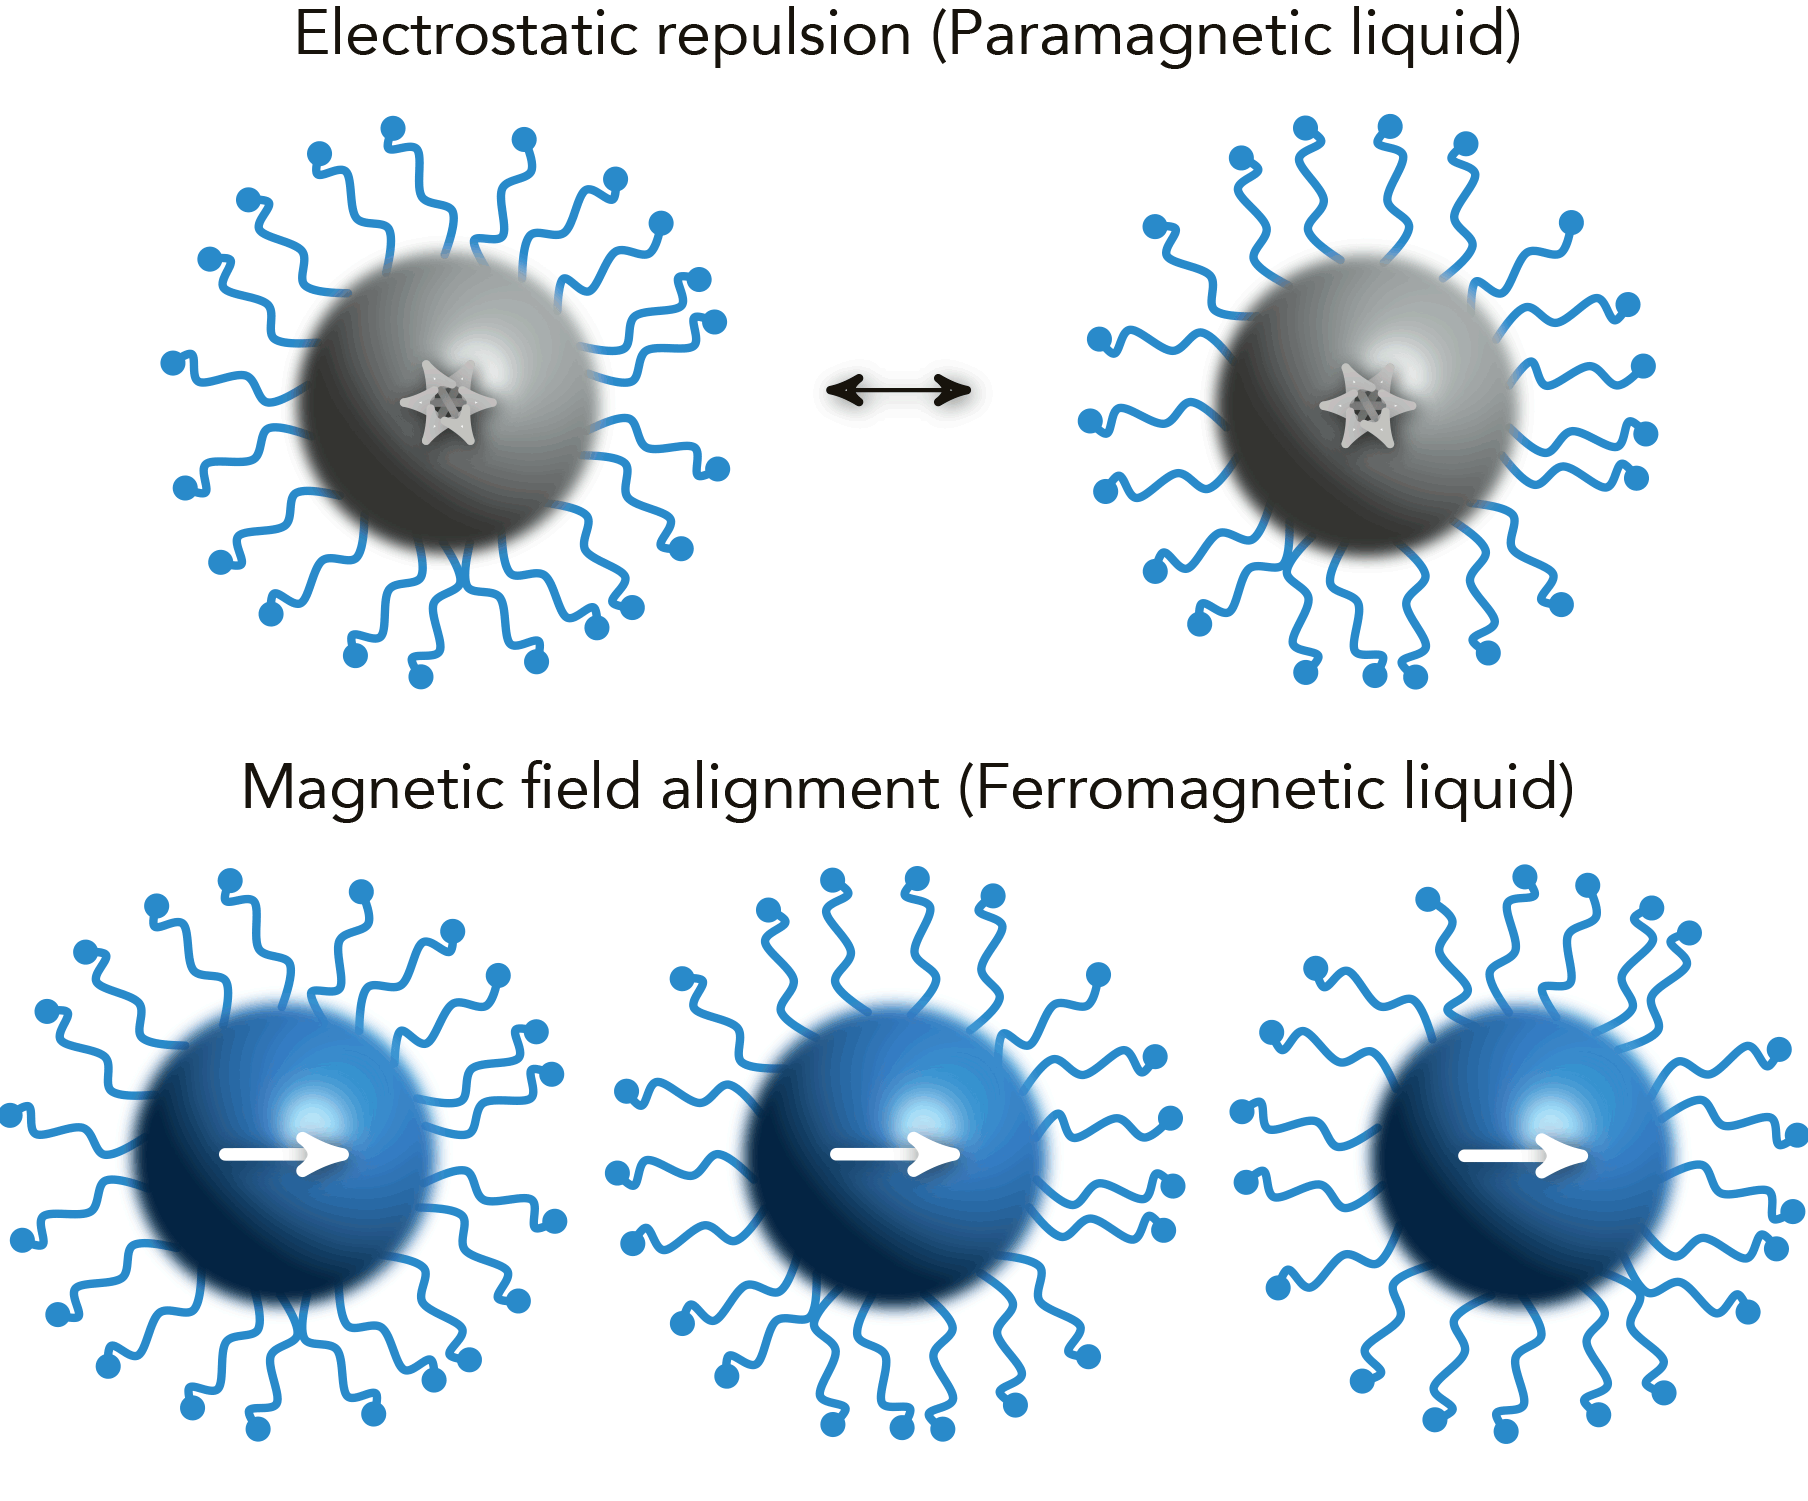 When no external magnetic field is present, the behavior of magnetic nanoparticles is governed by electrostatic repulsion—in other words, like charges repel, so the nanoparticles tend to stay away from one another (top). When an external magnetic field is applied, however, the magnetic nanoparticles align so that the north pole of one particle attracts the south pole of an adjacent particle (bottom).